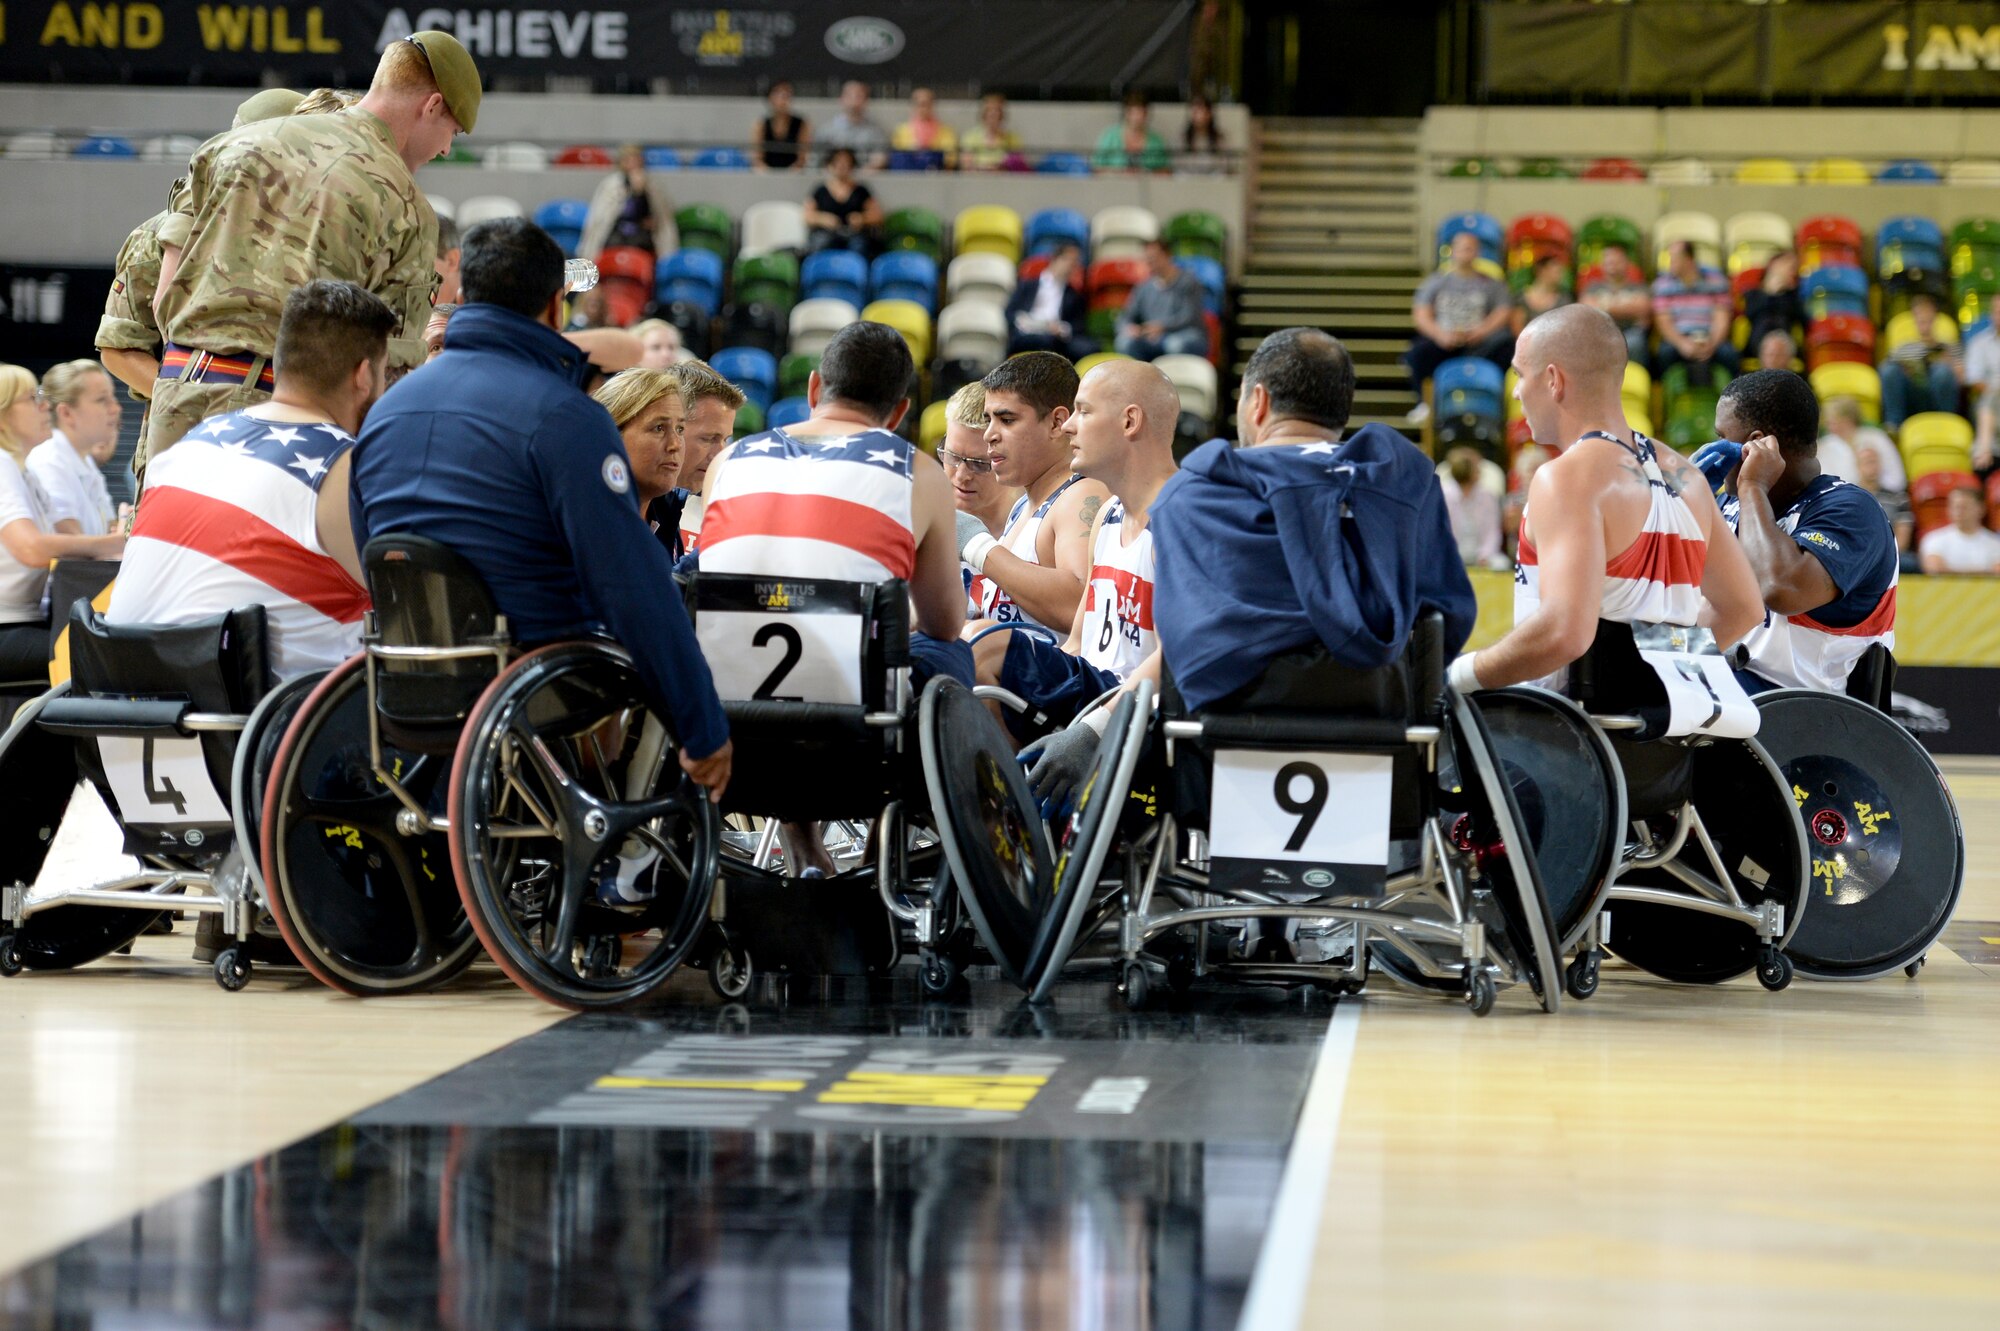 Members of the U.S. wheelchair rugby team are coached during a timeout of a wheelchair rugby match against Australia Sept. 12, 2014, at the 2014 Invictus Games in London. The U.S. won the match 14-4. Invictus Games is an international competition that brings together wounded, injured and ill service members in the spirit of friendly athletic competition. American Soldiers, Sailors, Airmen and Marines are representing the U.S. in the competition which is taking place Sept. 10-14. (U.S. Navy photo/Mass Communication Specialist 2nd Class Joshua D. Sheppard)